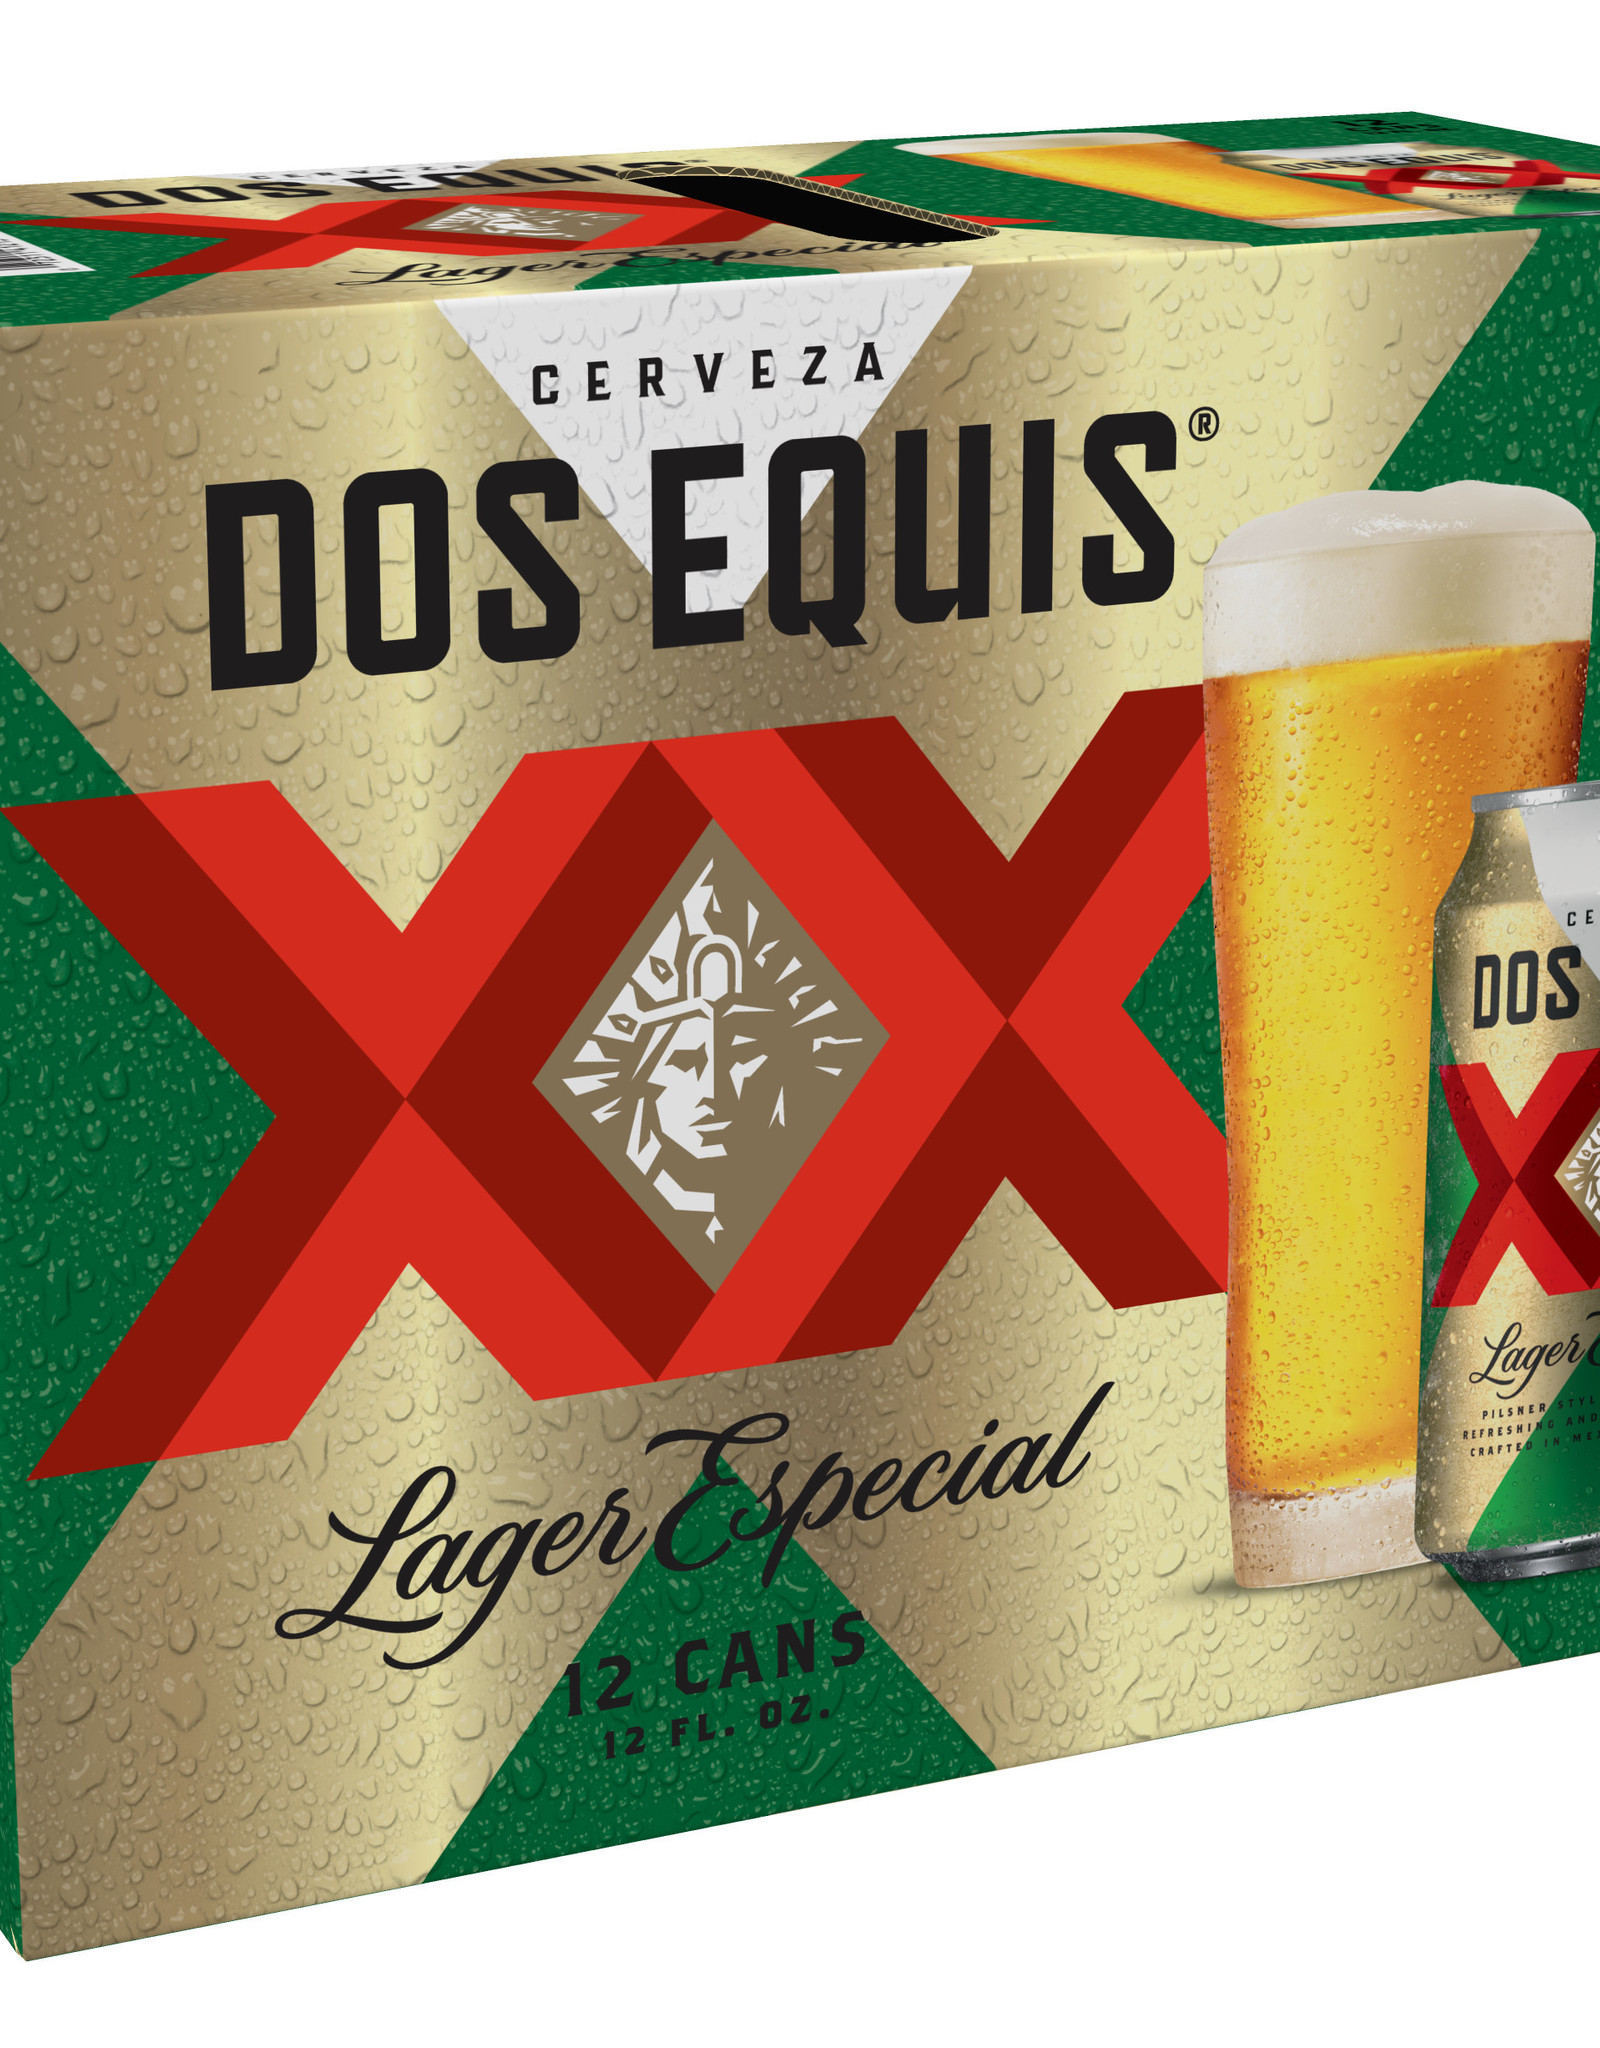 Dos Equis Lager Especial 12x12 oz cans